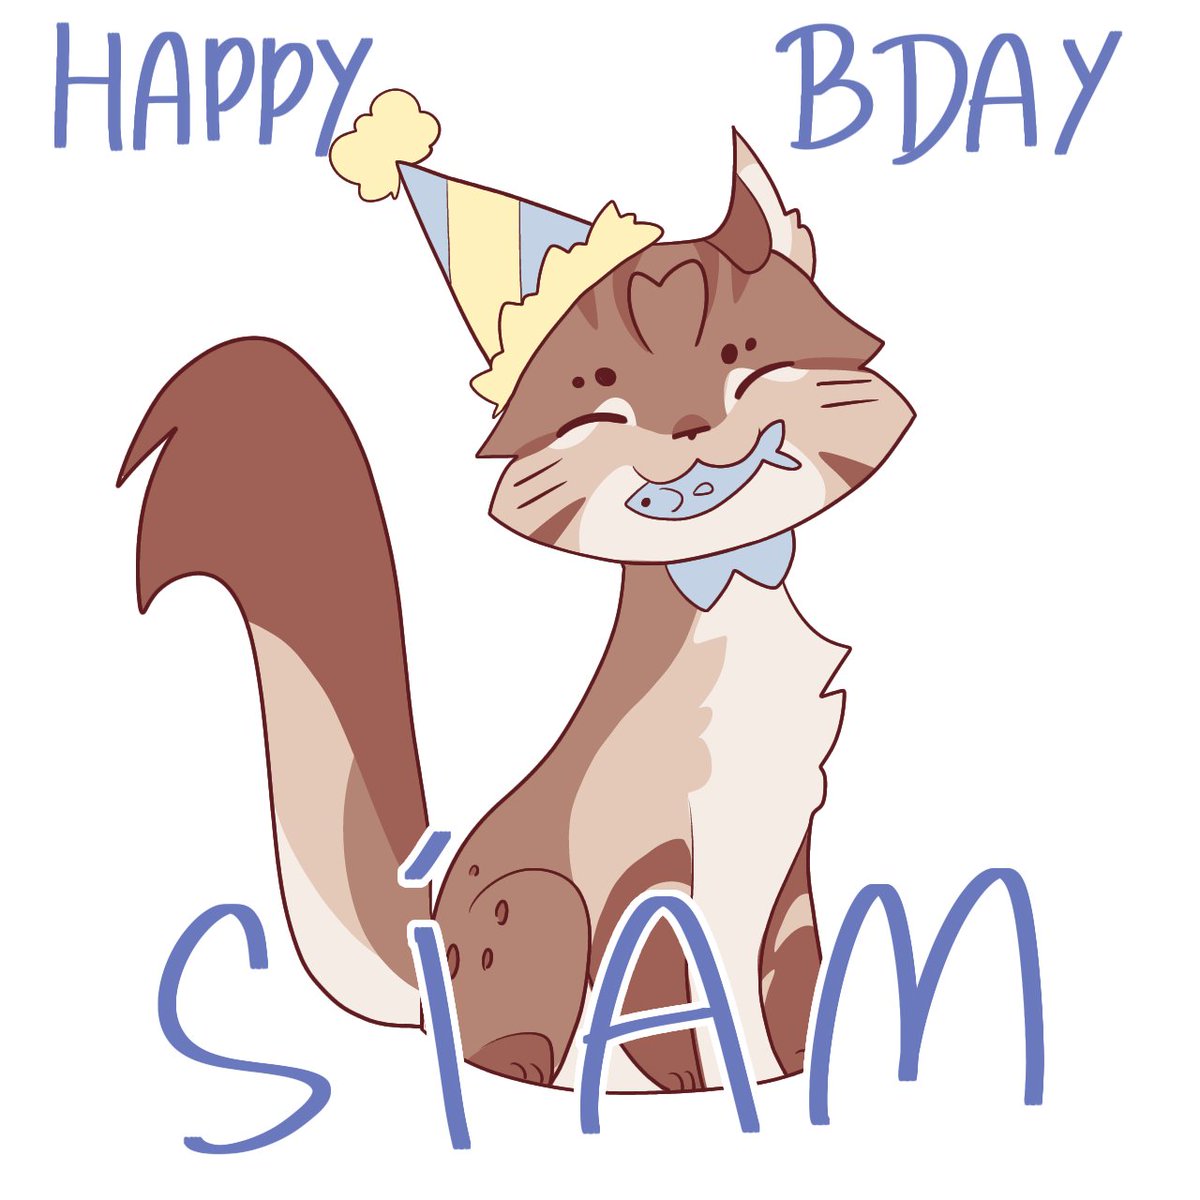 On this day, my dear cat, Sir Síam Fluffypants III, turns 5 years old!!!  He's already an old man, but as the years go by, he seems happier than the last. HAPPY BIRTHDAY SÍAM-FEEM-FO-FÍAM!!!?